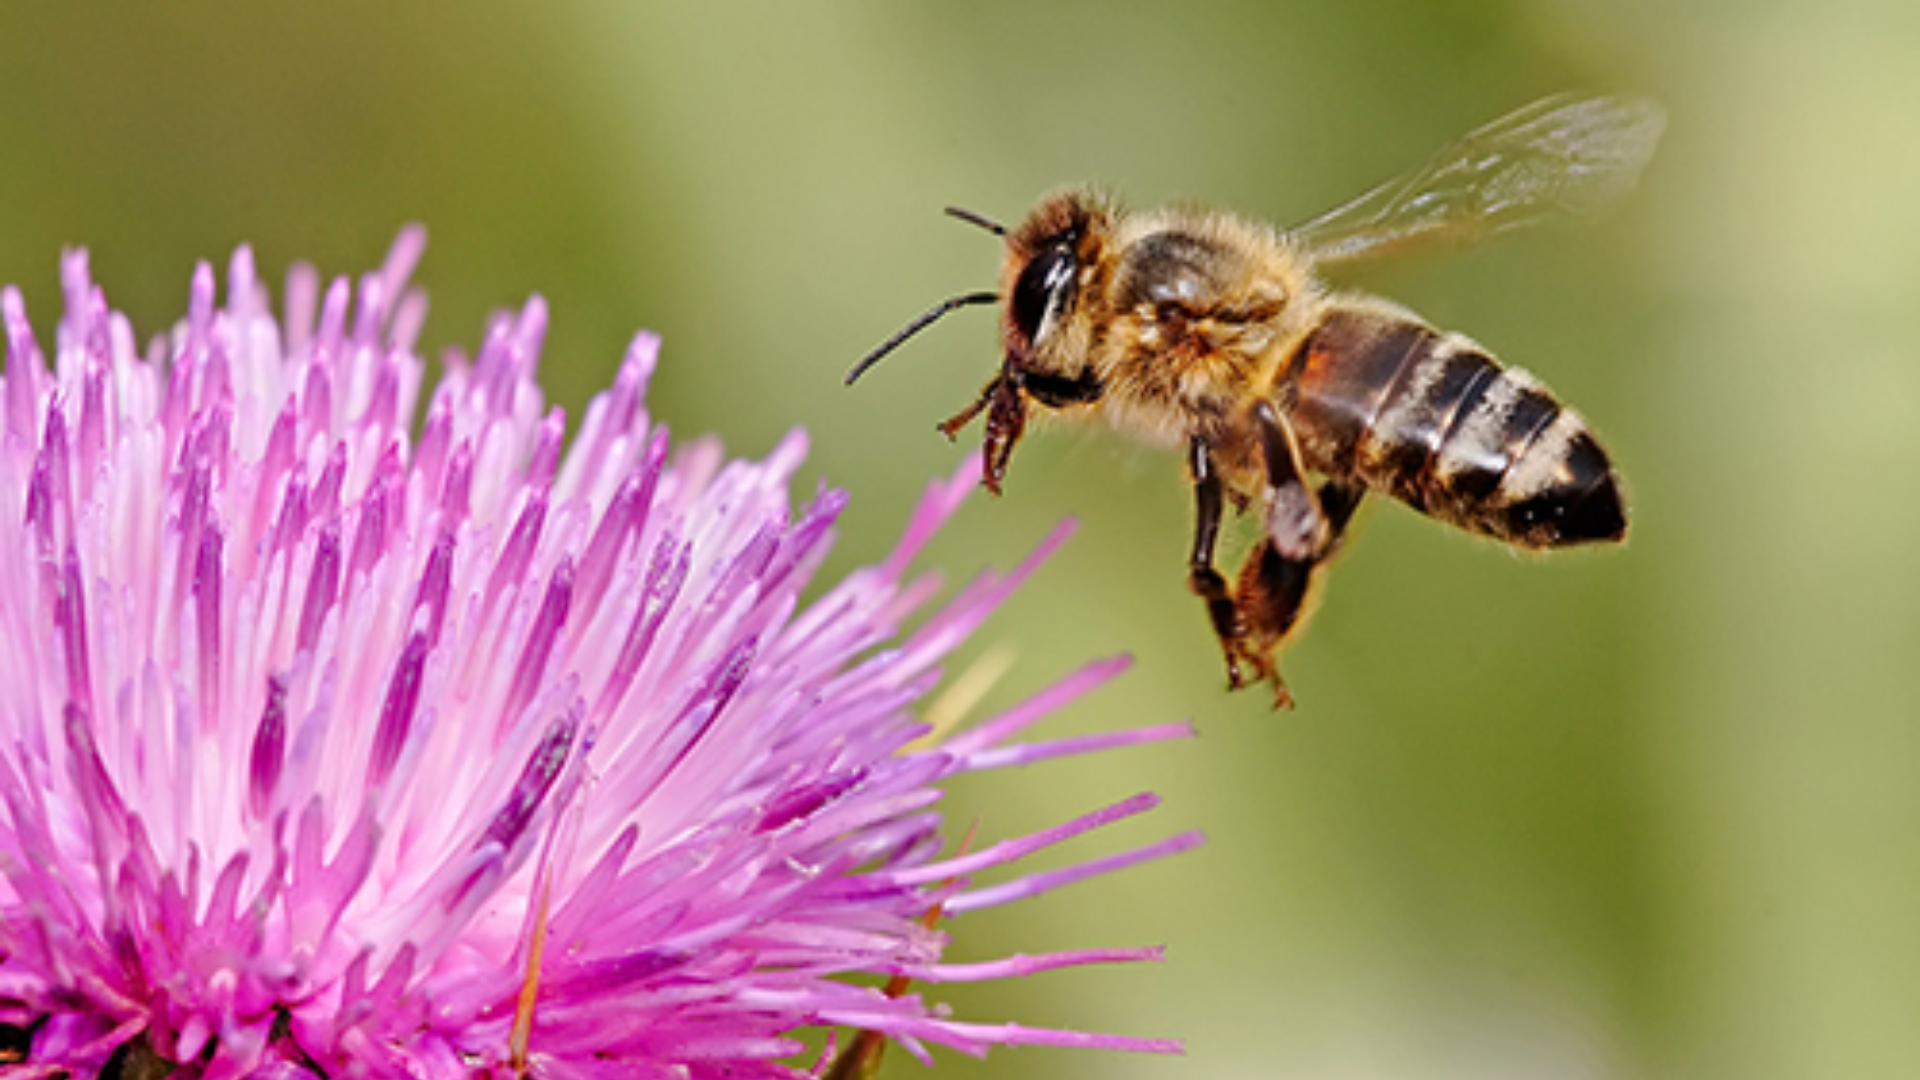 Study finds that adjuvants and pesticides interfere with honeybees’ ability to smell